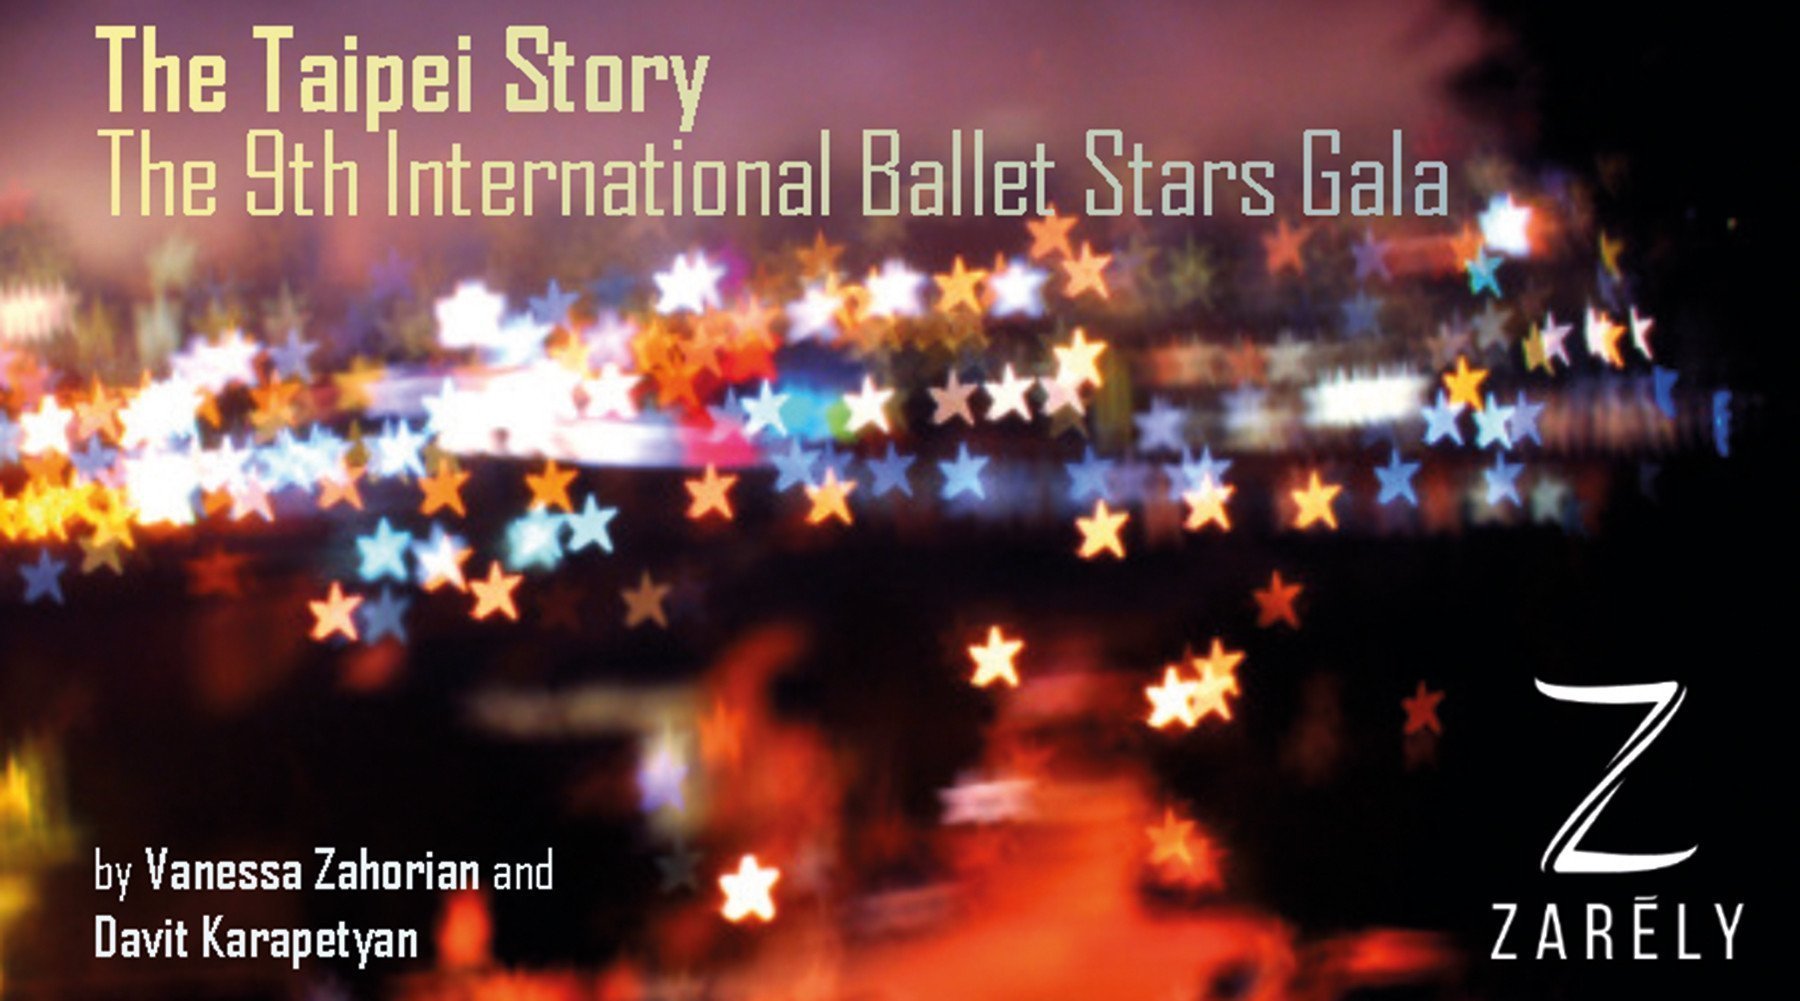 The 9th International Ballet Stars Gala in Taipei: The Inside Story by Ballet Dancers